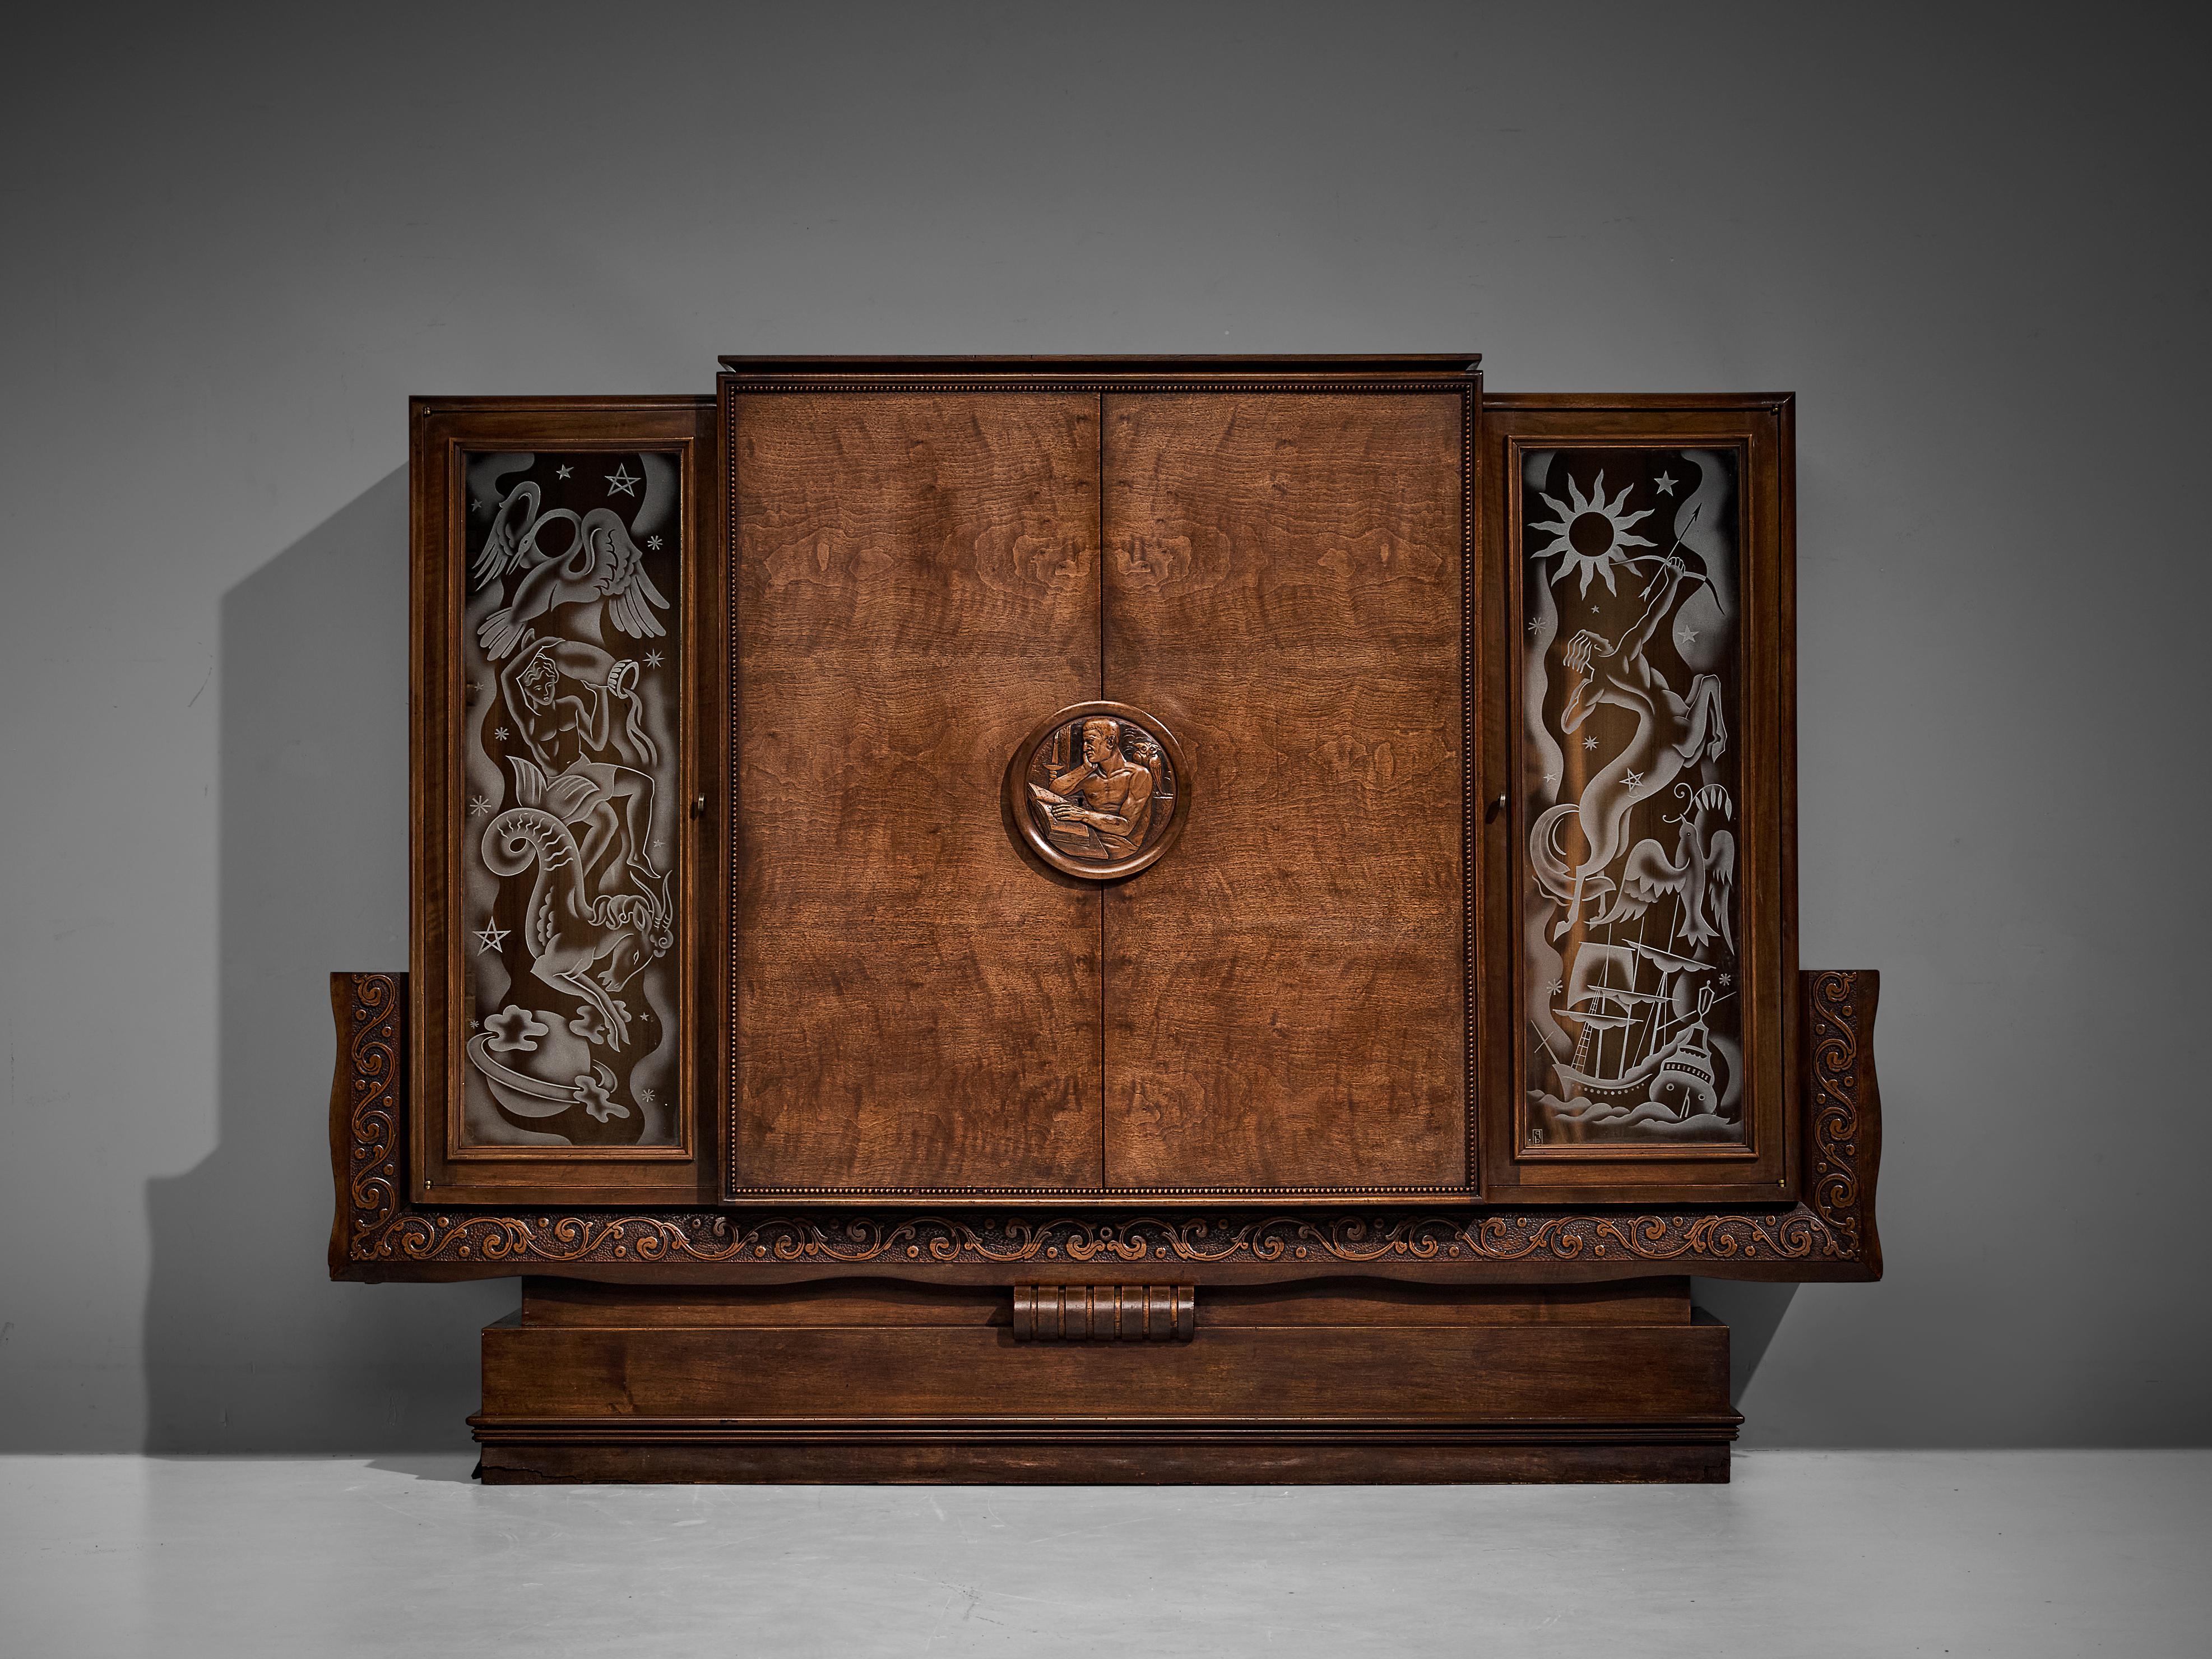 Armoire, walnut, glass, France, 1930s 

This exceptional armoire undoubtedly breathes the Art Deco Period of the 1930s. The design convinces visually through its grotesque execution of ornamental arrangements on the glass panels featuring